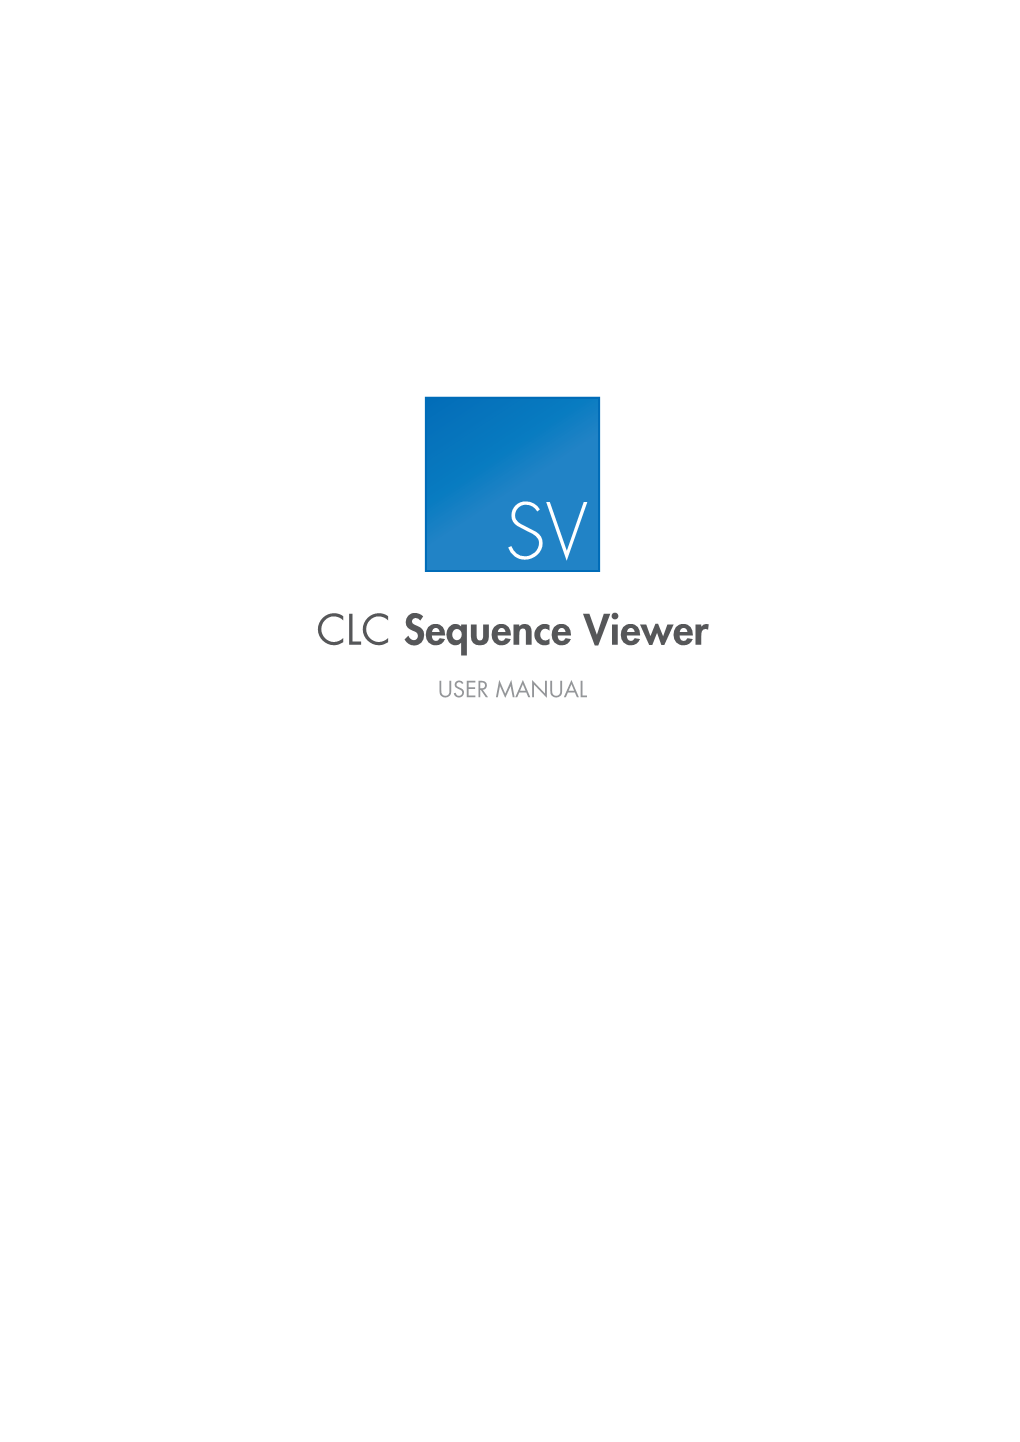 CLC Sequence Viewer